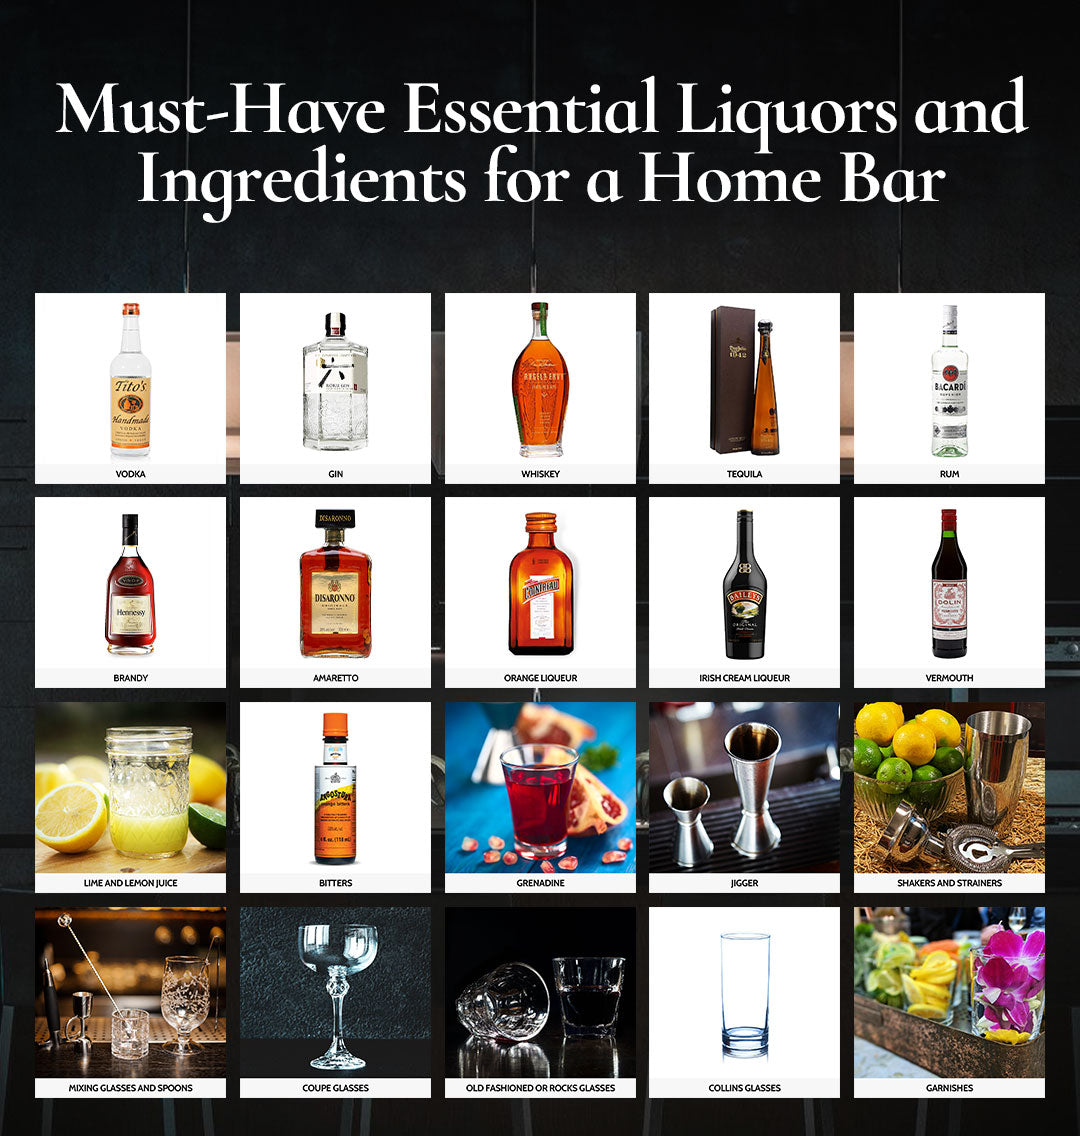 Must-Have Essential Liquors and Ingredients for a Home Bar